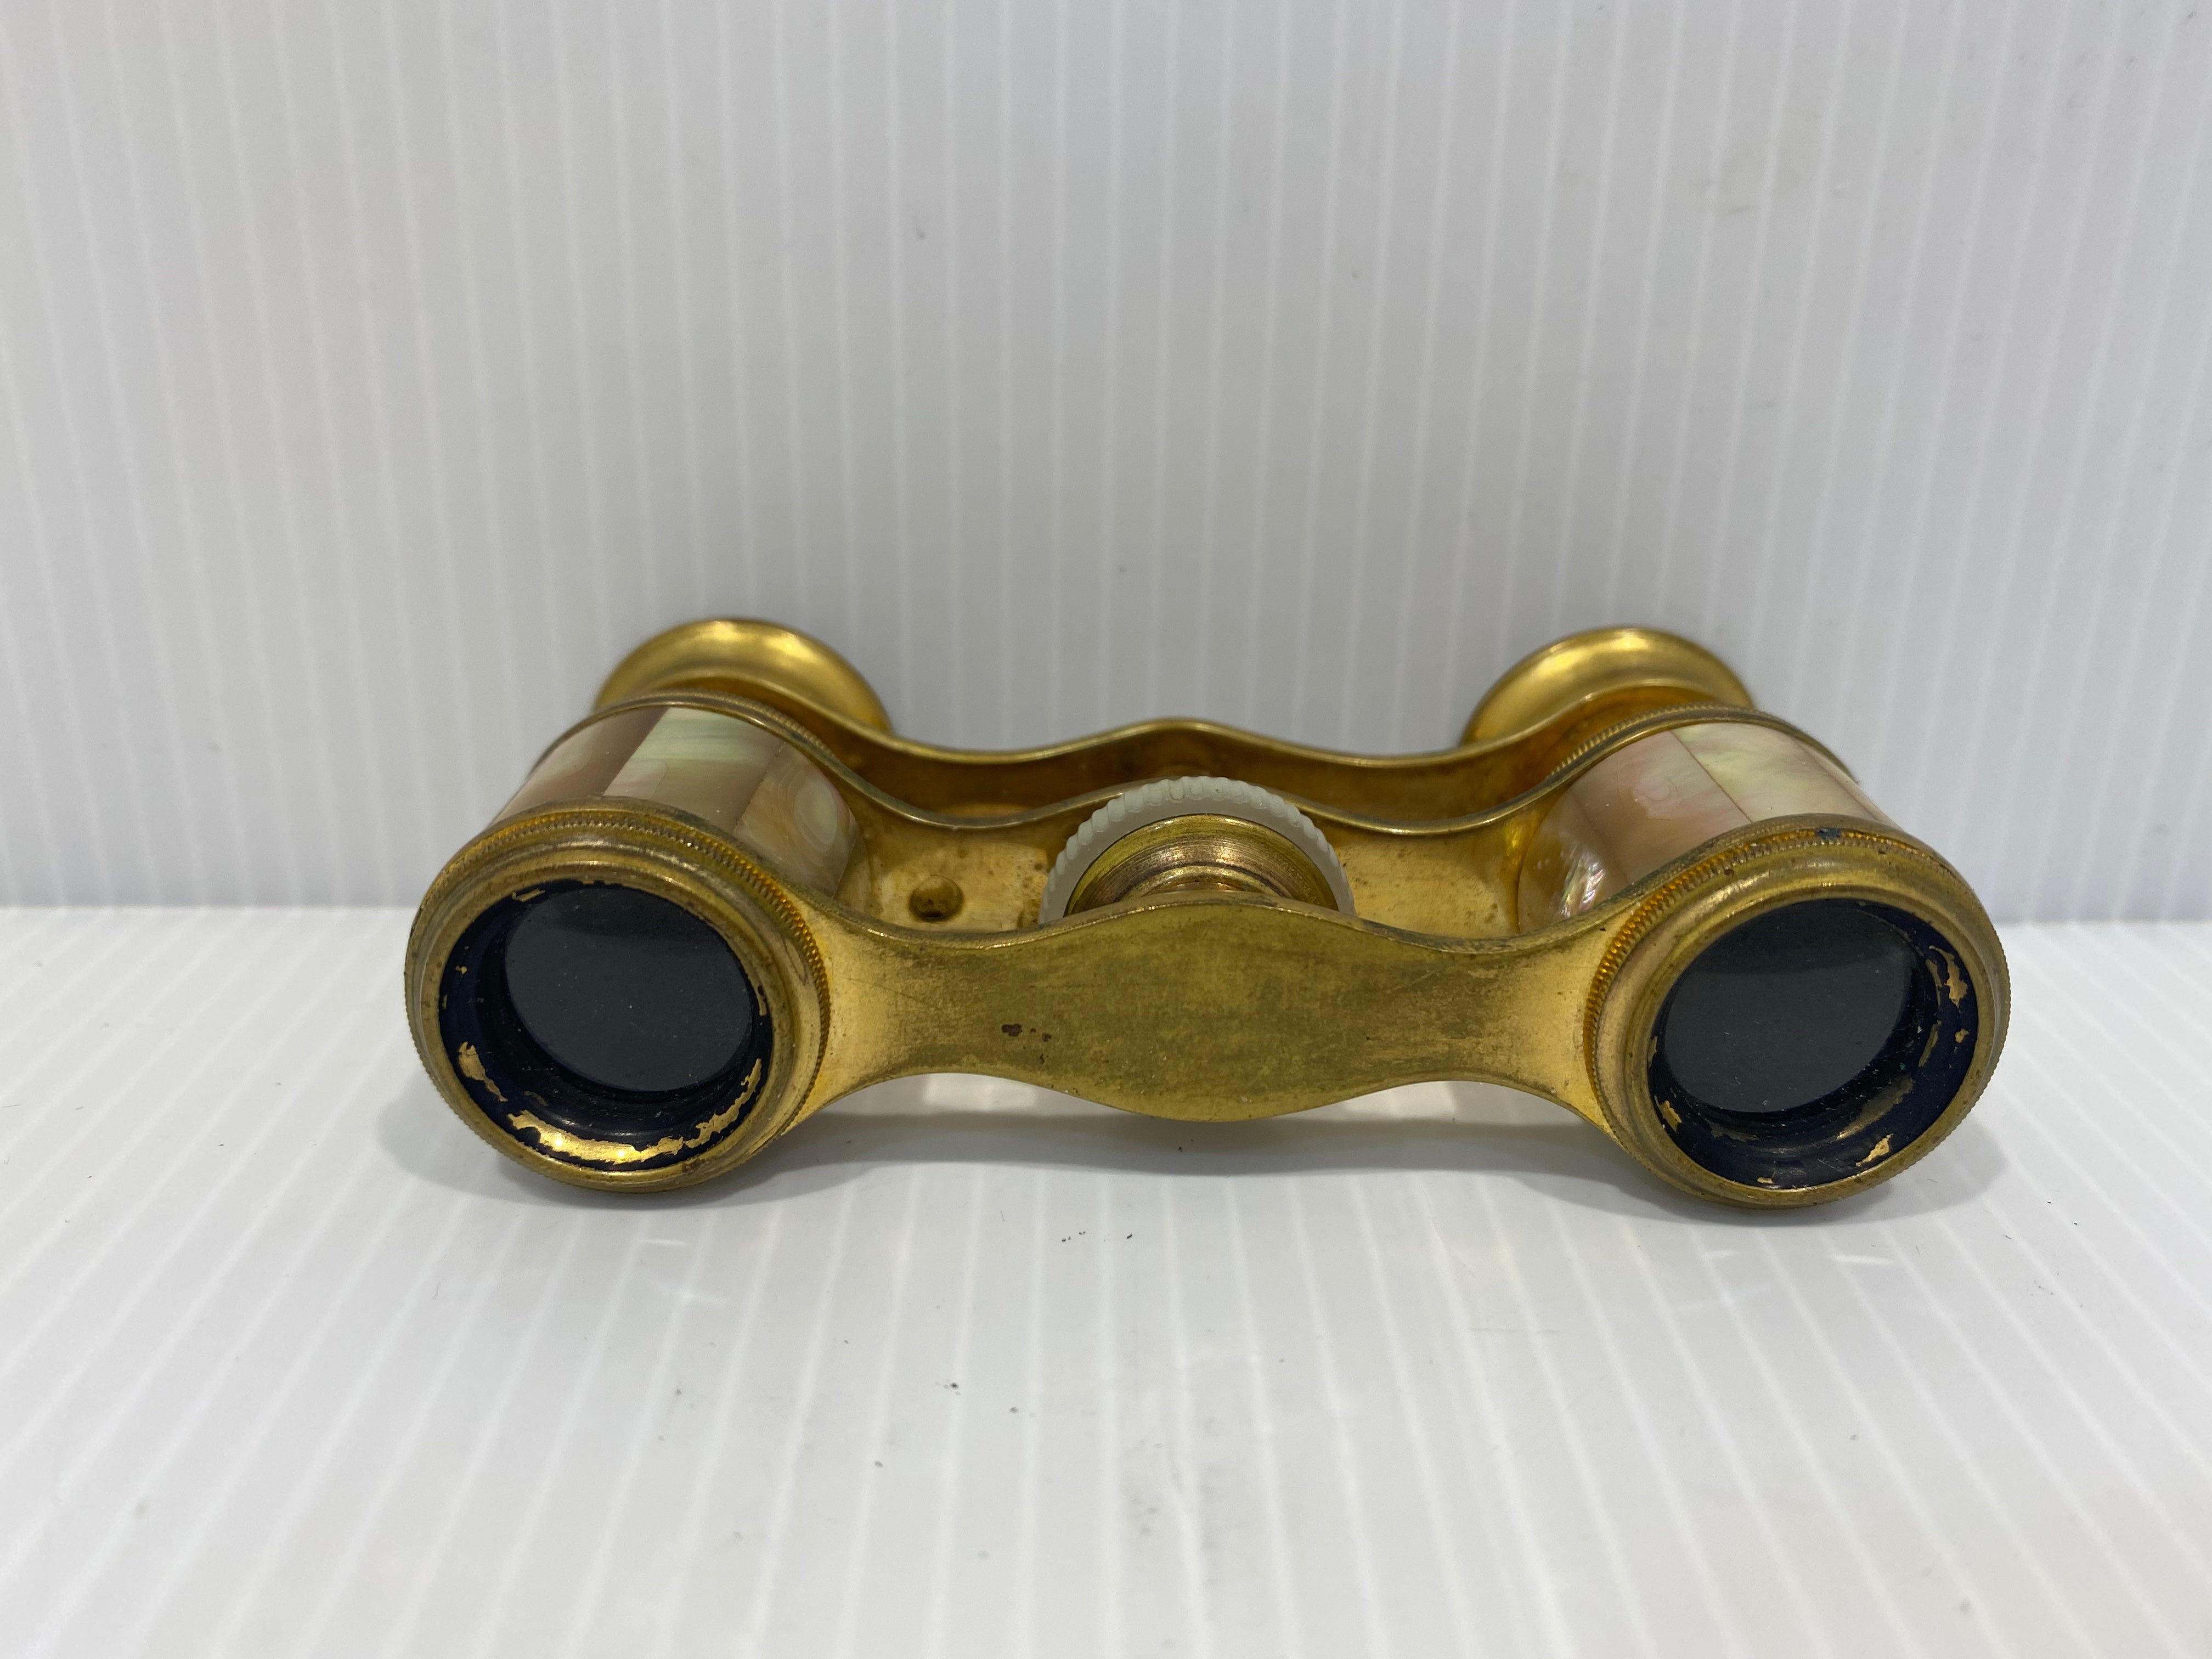 Antique late 1800's to early 1900's. G.E. Pryor Paris Opera glasses